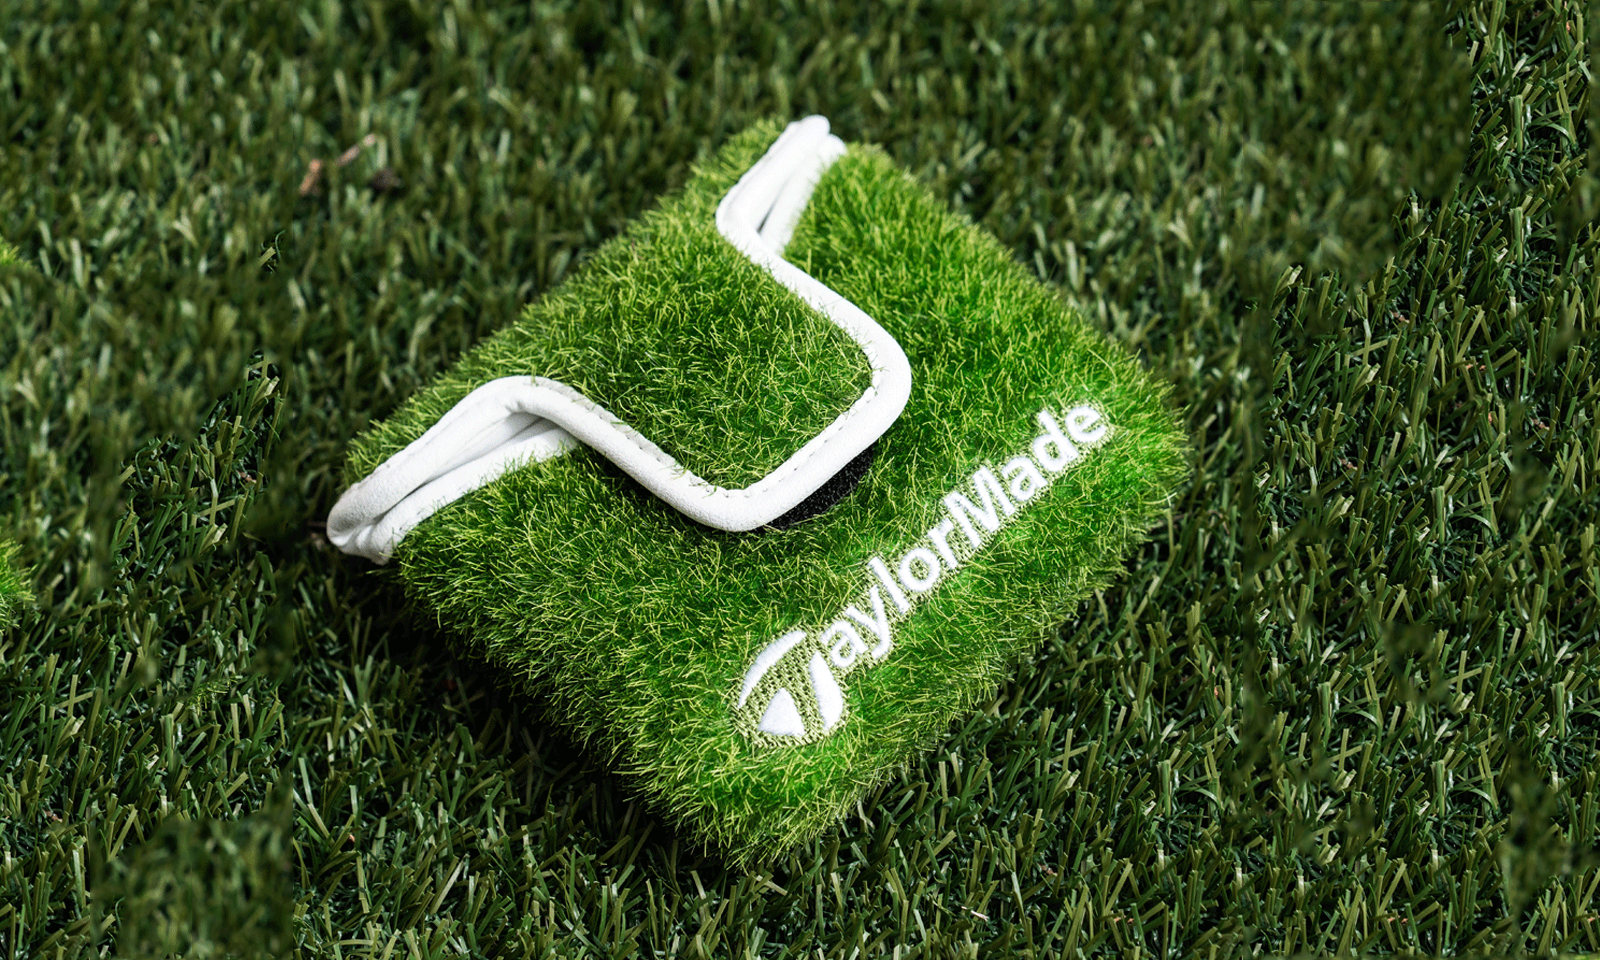 Turf inspired Putter Cover